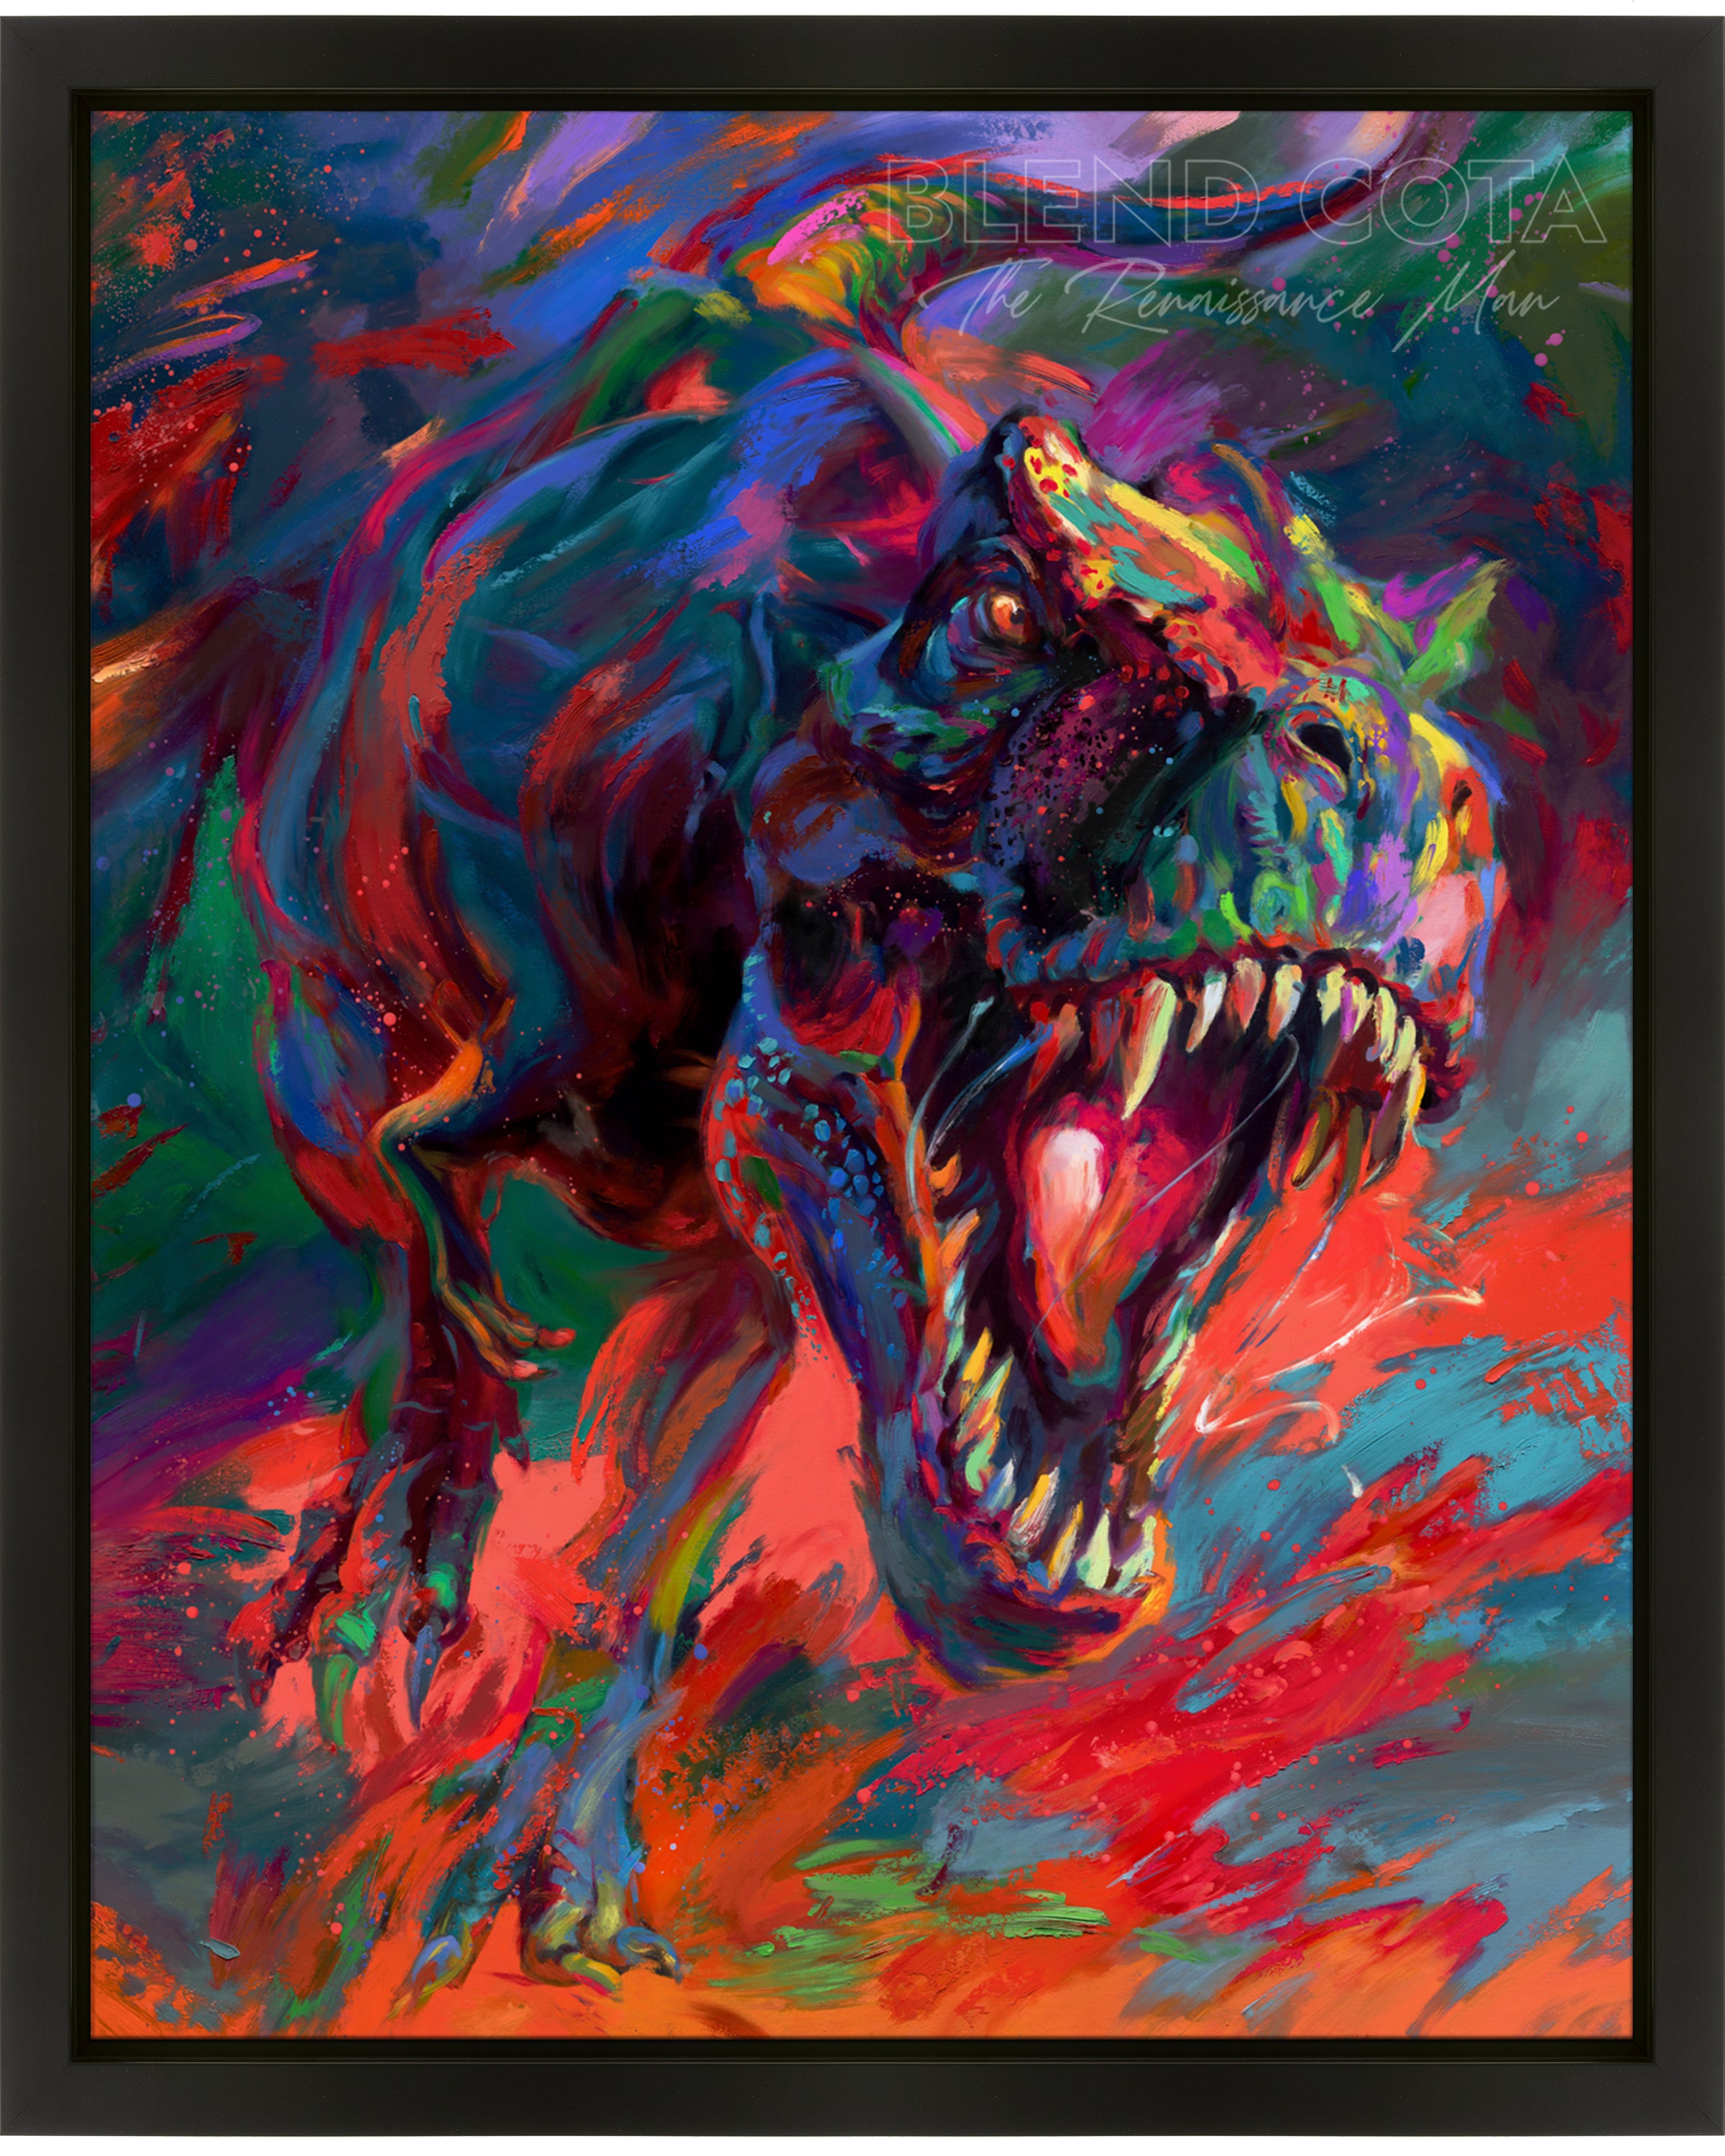 Framed original oil painting on canvas of the t-rex from jurassic period the apex dinosaur predator jaw full of teeth chasing you, painted with colorful brushstrokes in an expressionistic style.